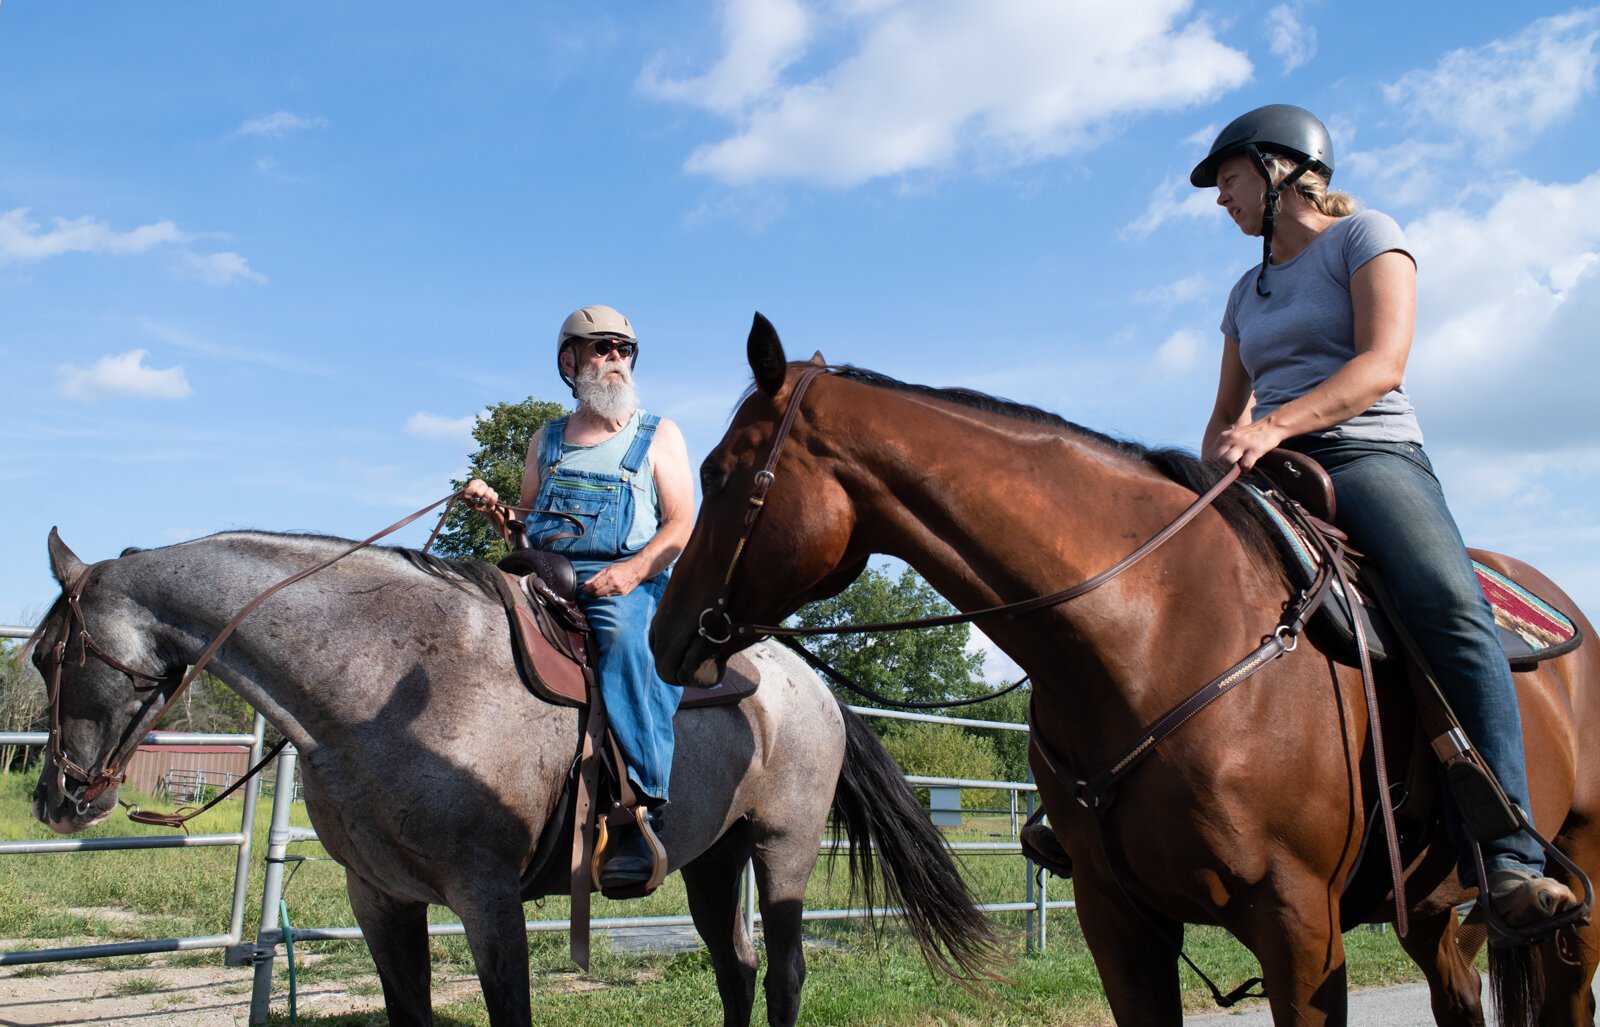 Horses can help military veterans battling PTSD or other disabilities.